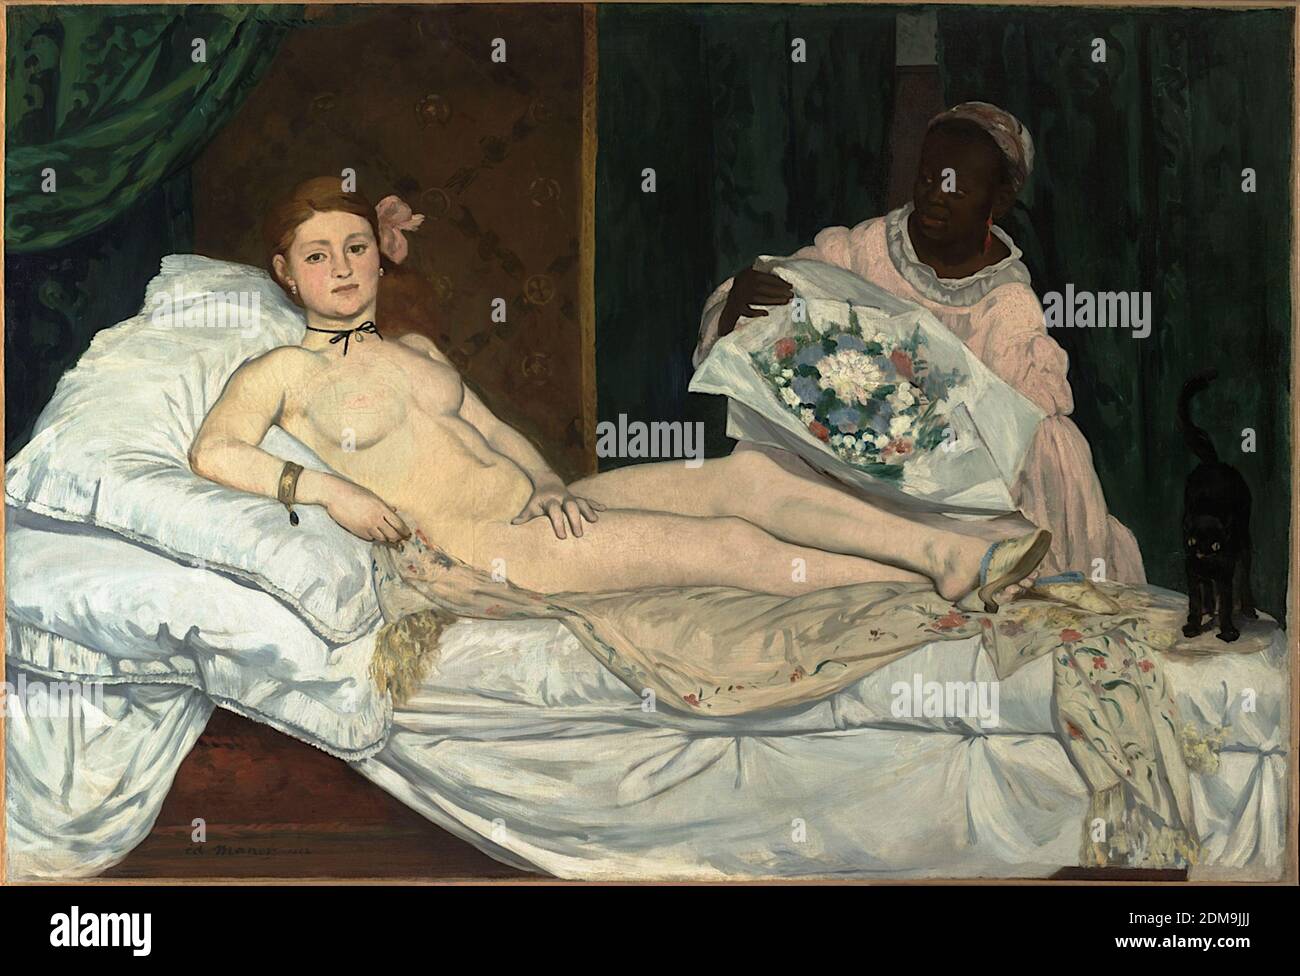 Olympia (1863) French modernist painting by Édouard Manet - Very high resolution and quality image Stock Photo